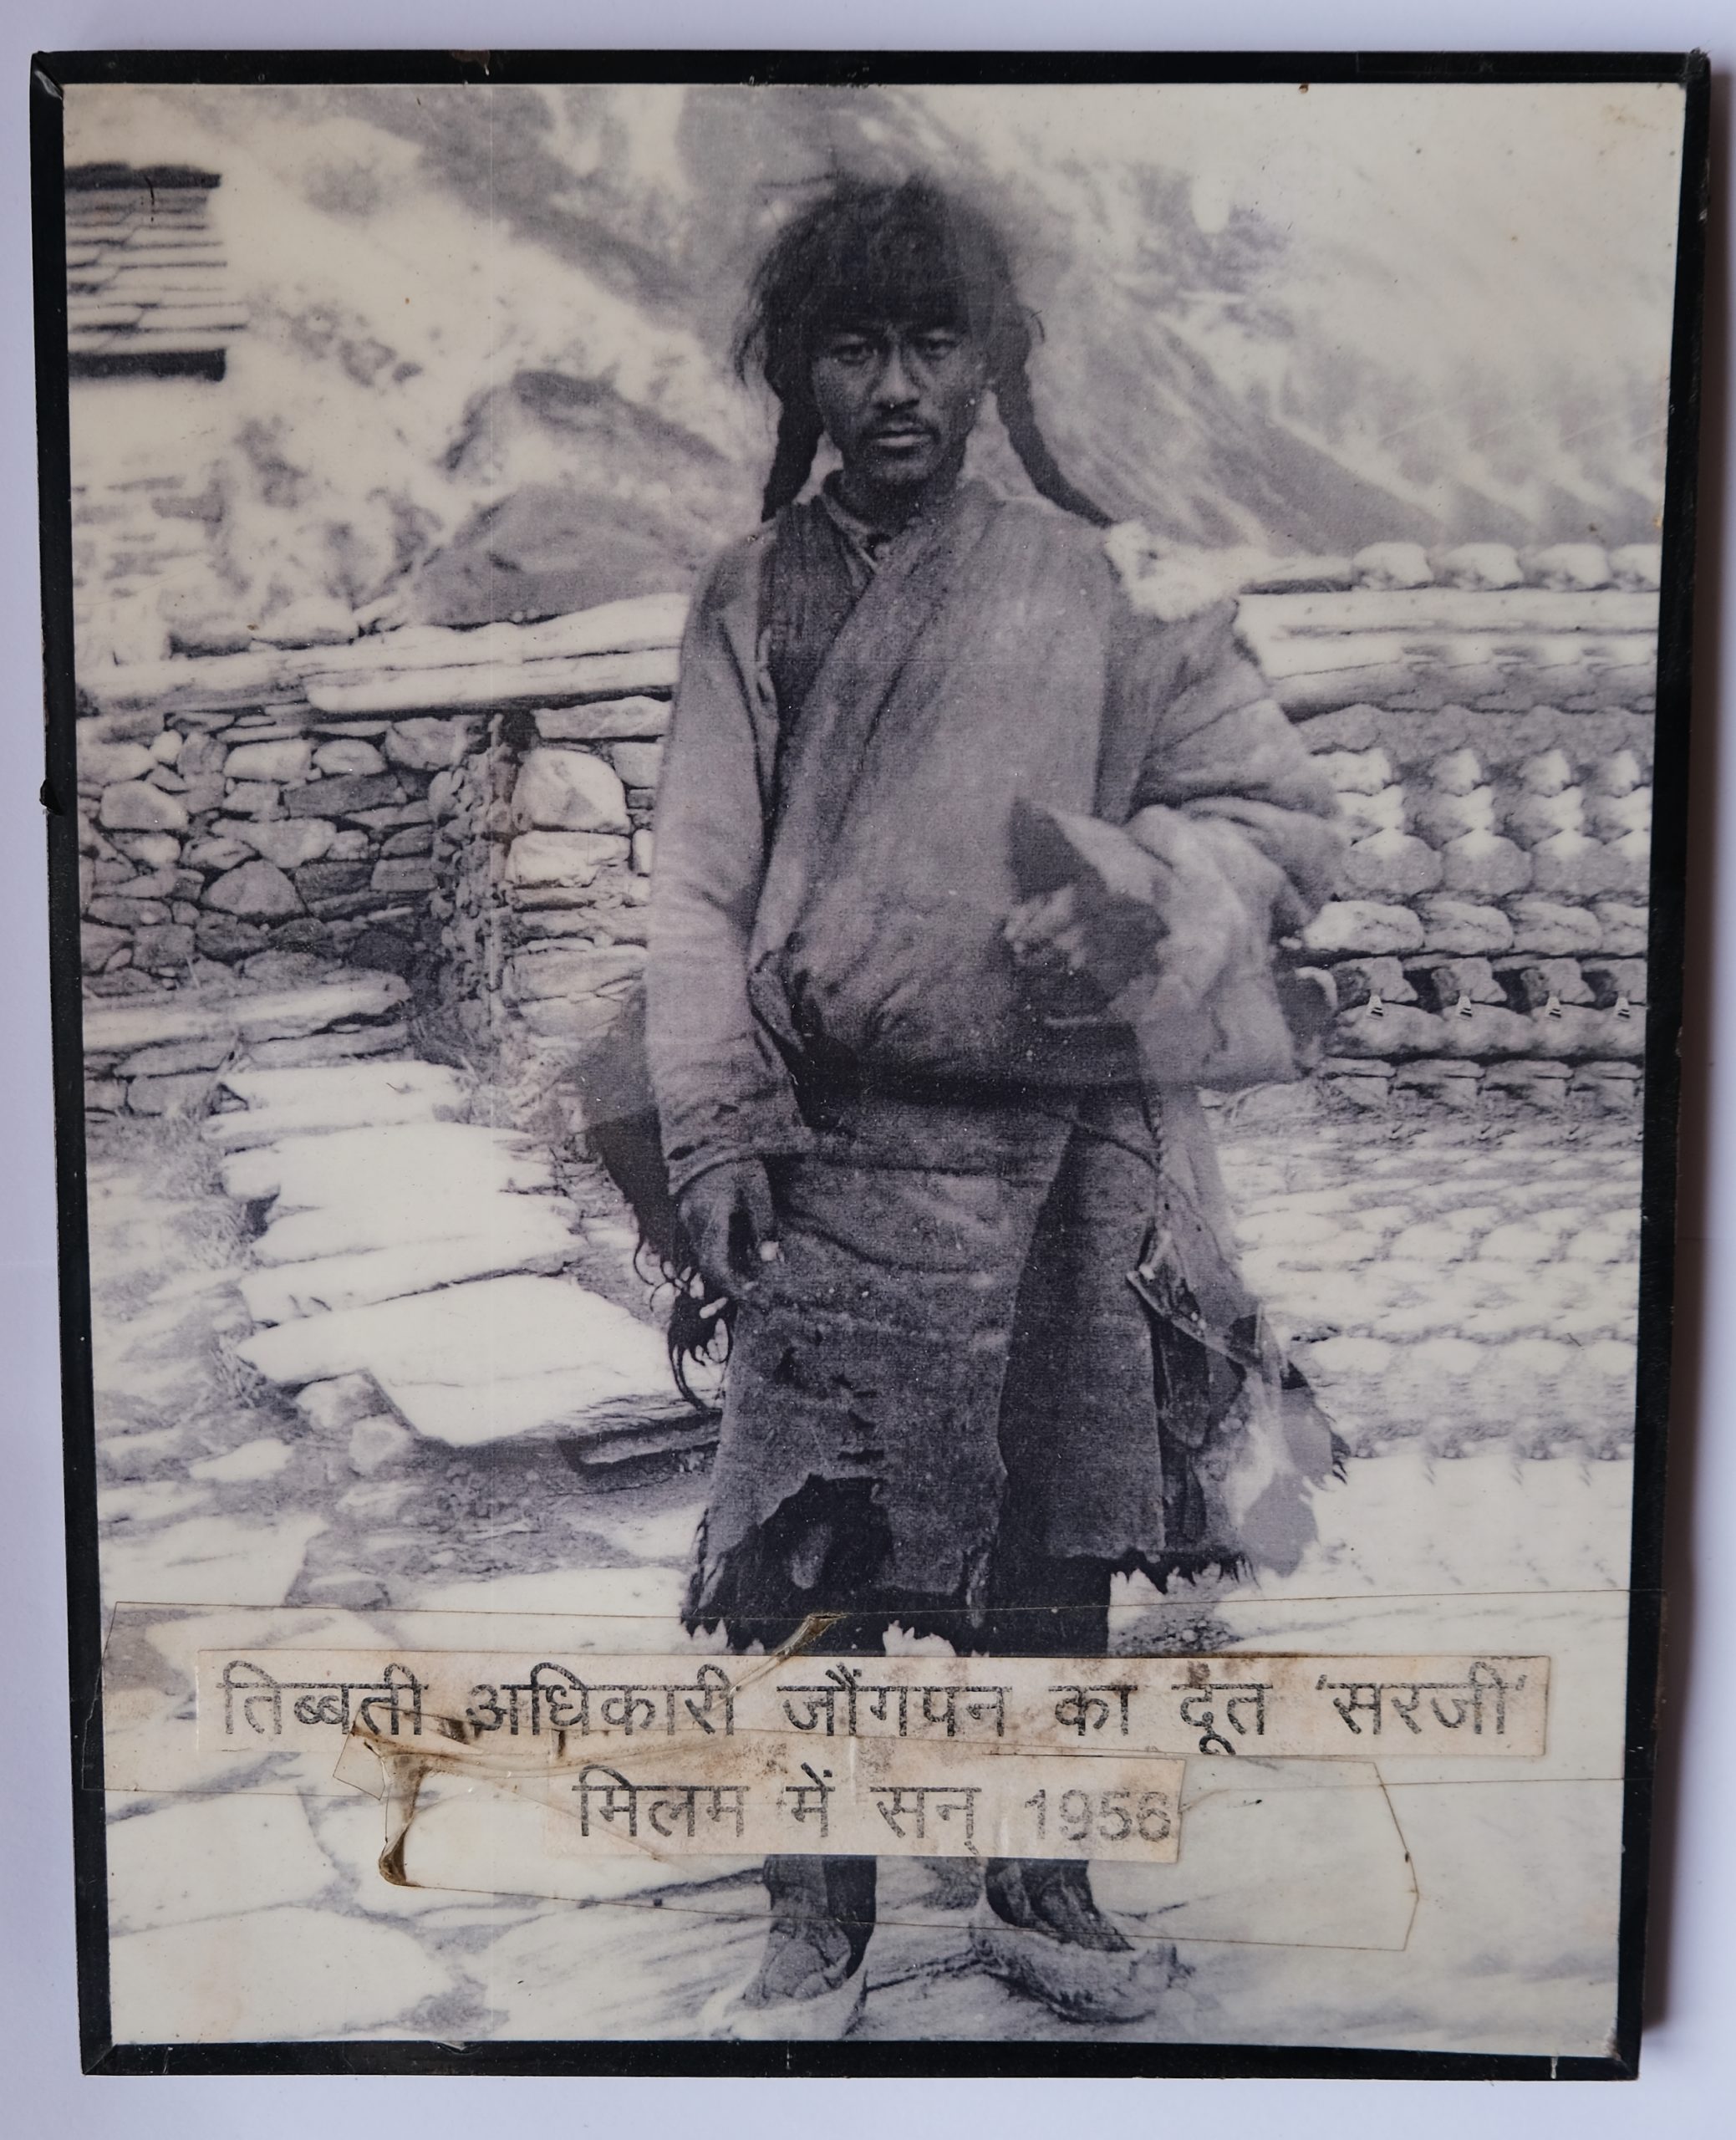 A Bhutia messenger for a Tibetan official, photographed in Milam village, Johar Valley, in 1956